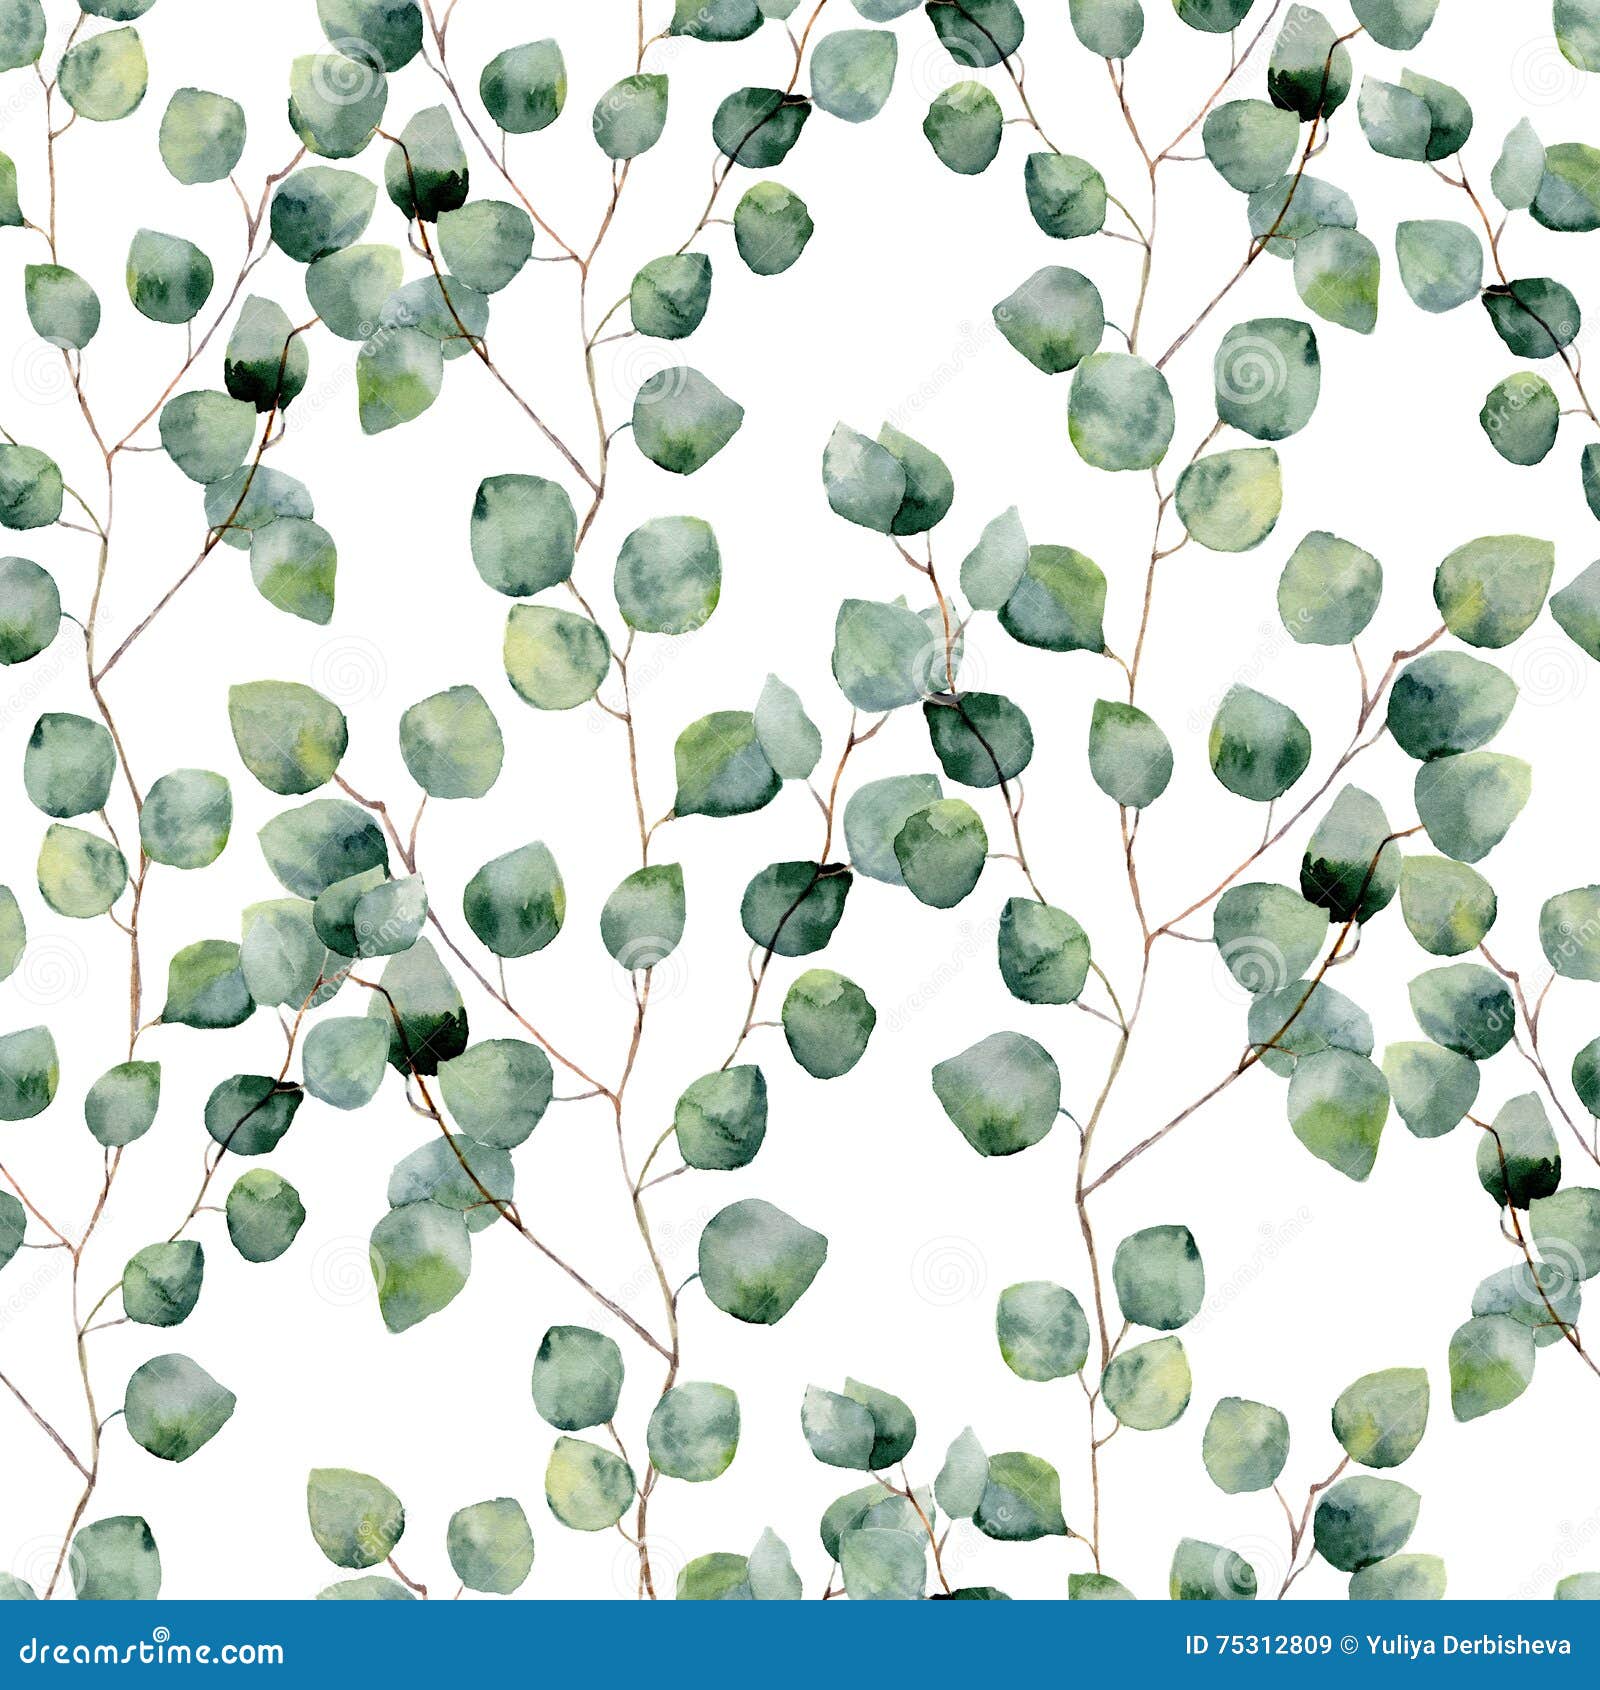 watercolor green floral seamless pattern with eucalyptus round leaves